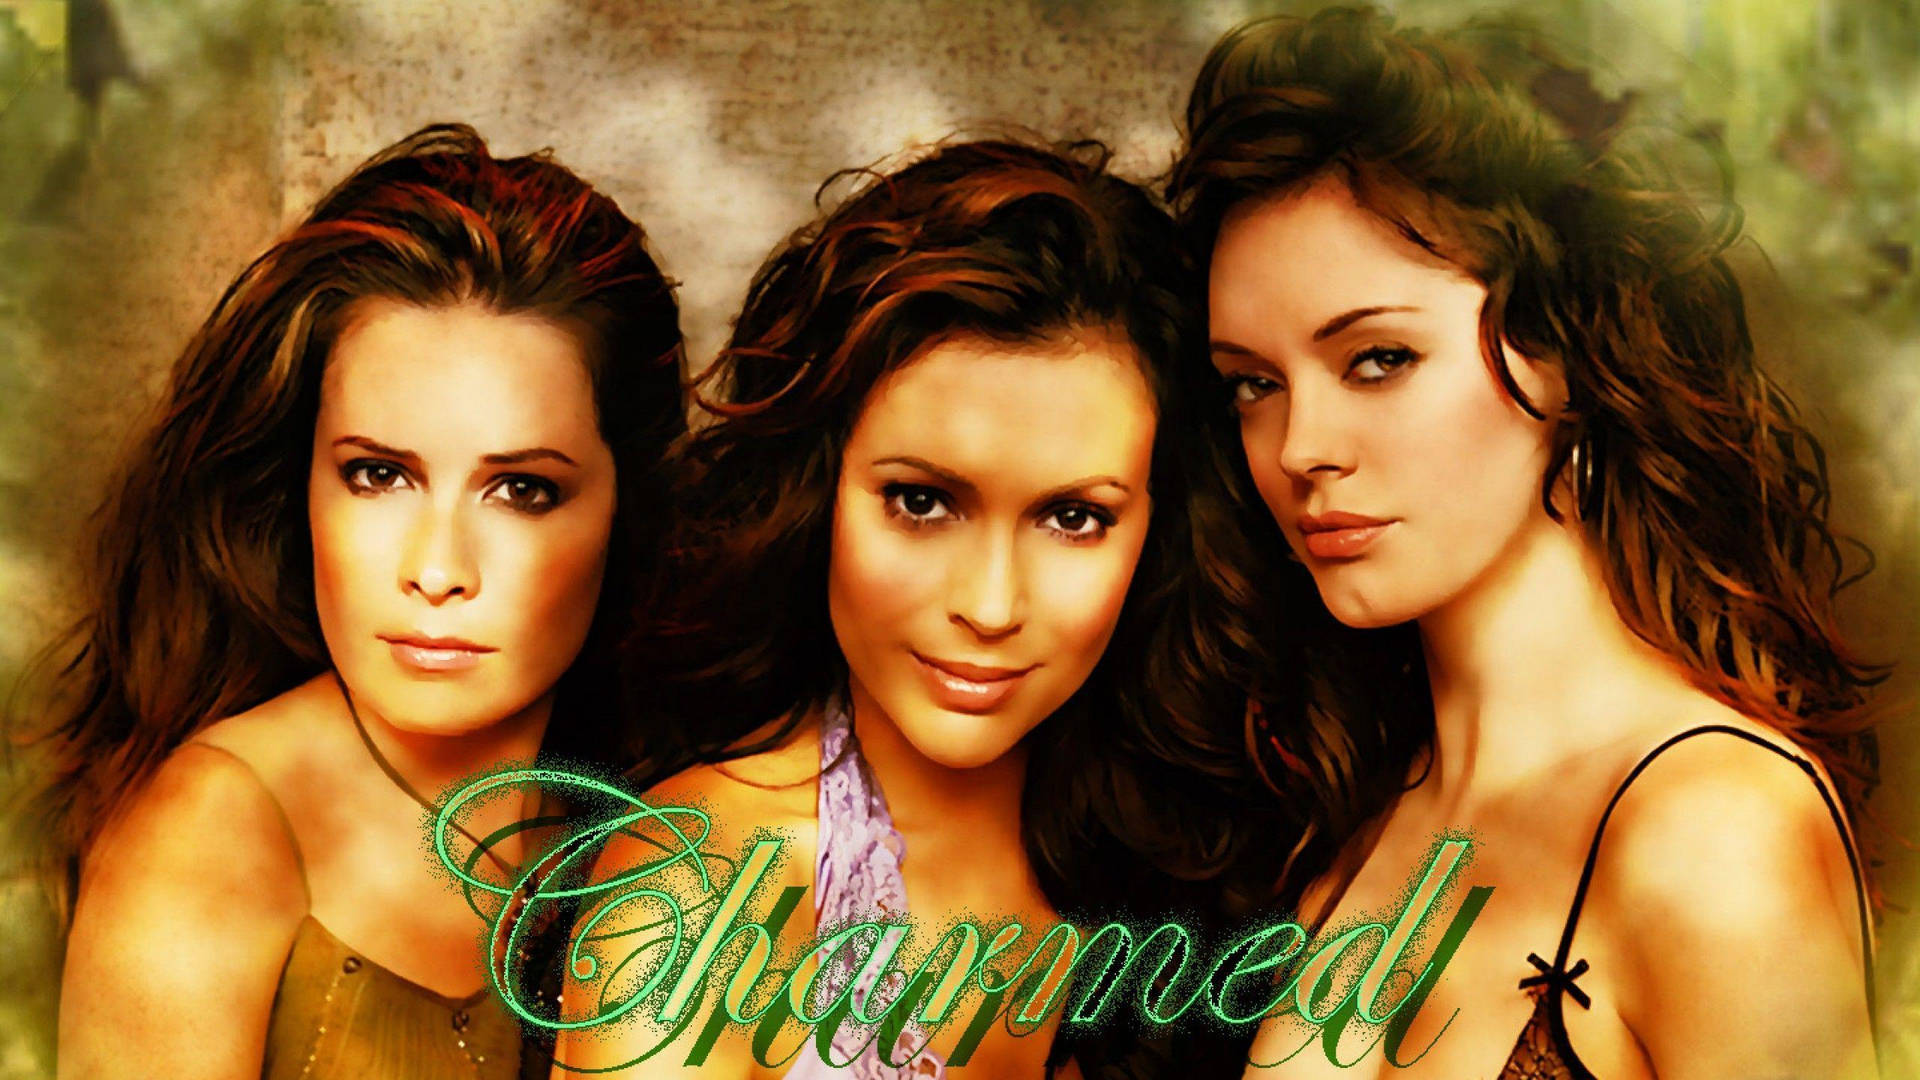 Three Main Characters Of Charmed Background